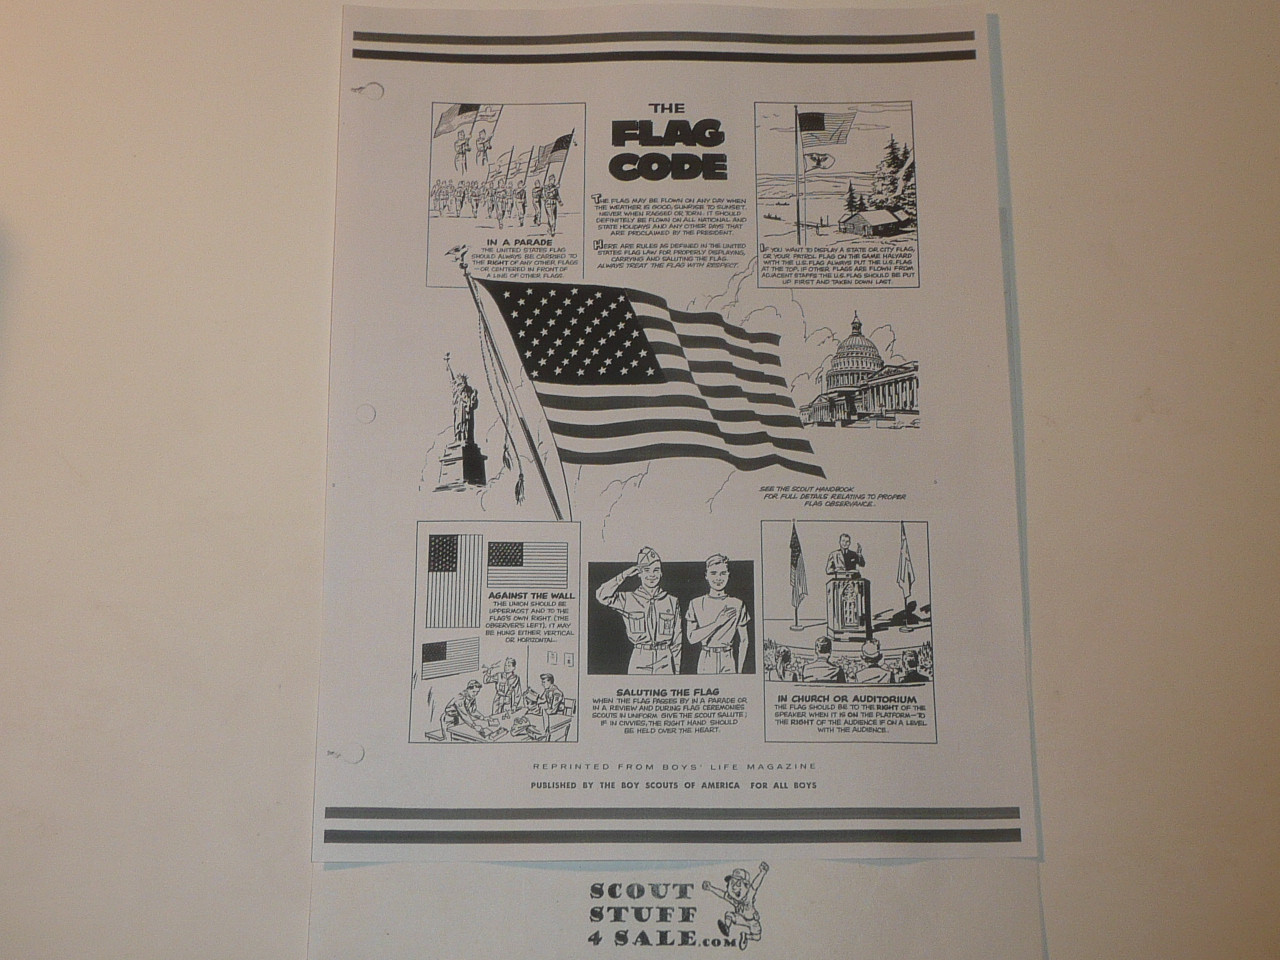 The Flag Code, Boys' Life Single Topic Reprint from the 1950's - 1960's , written for Scouts, great teaching materials